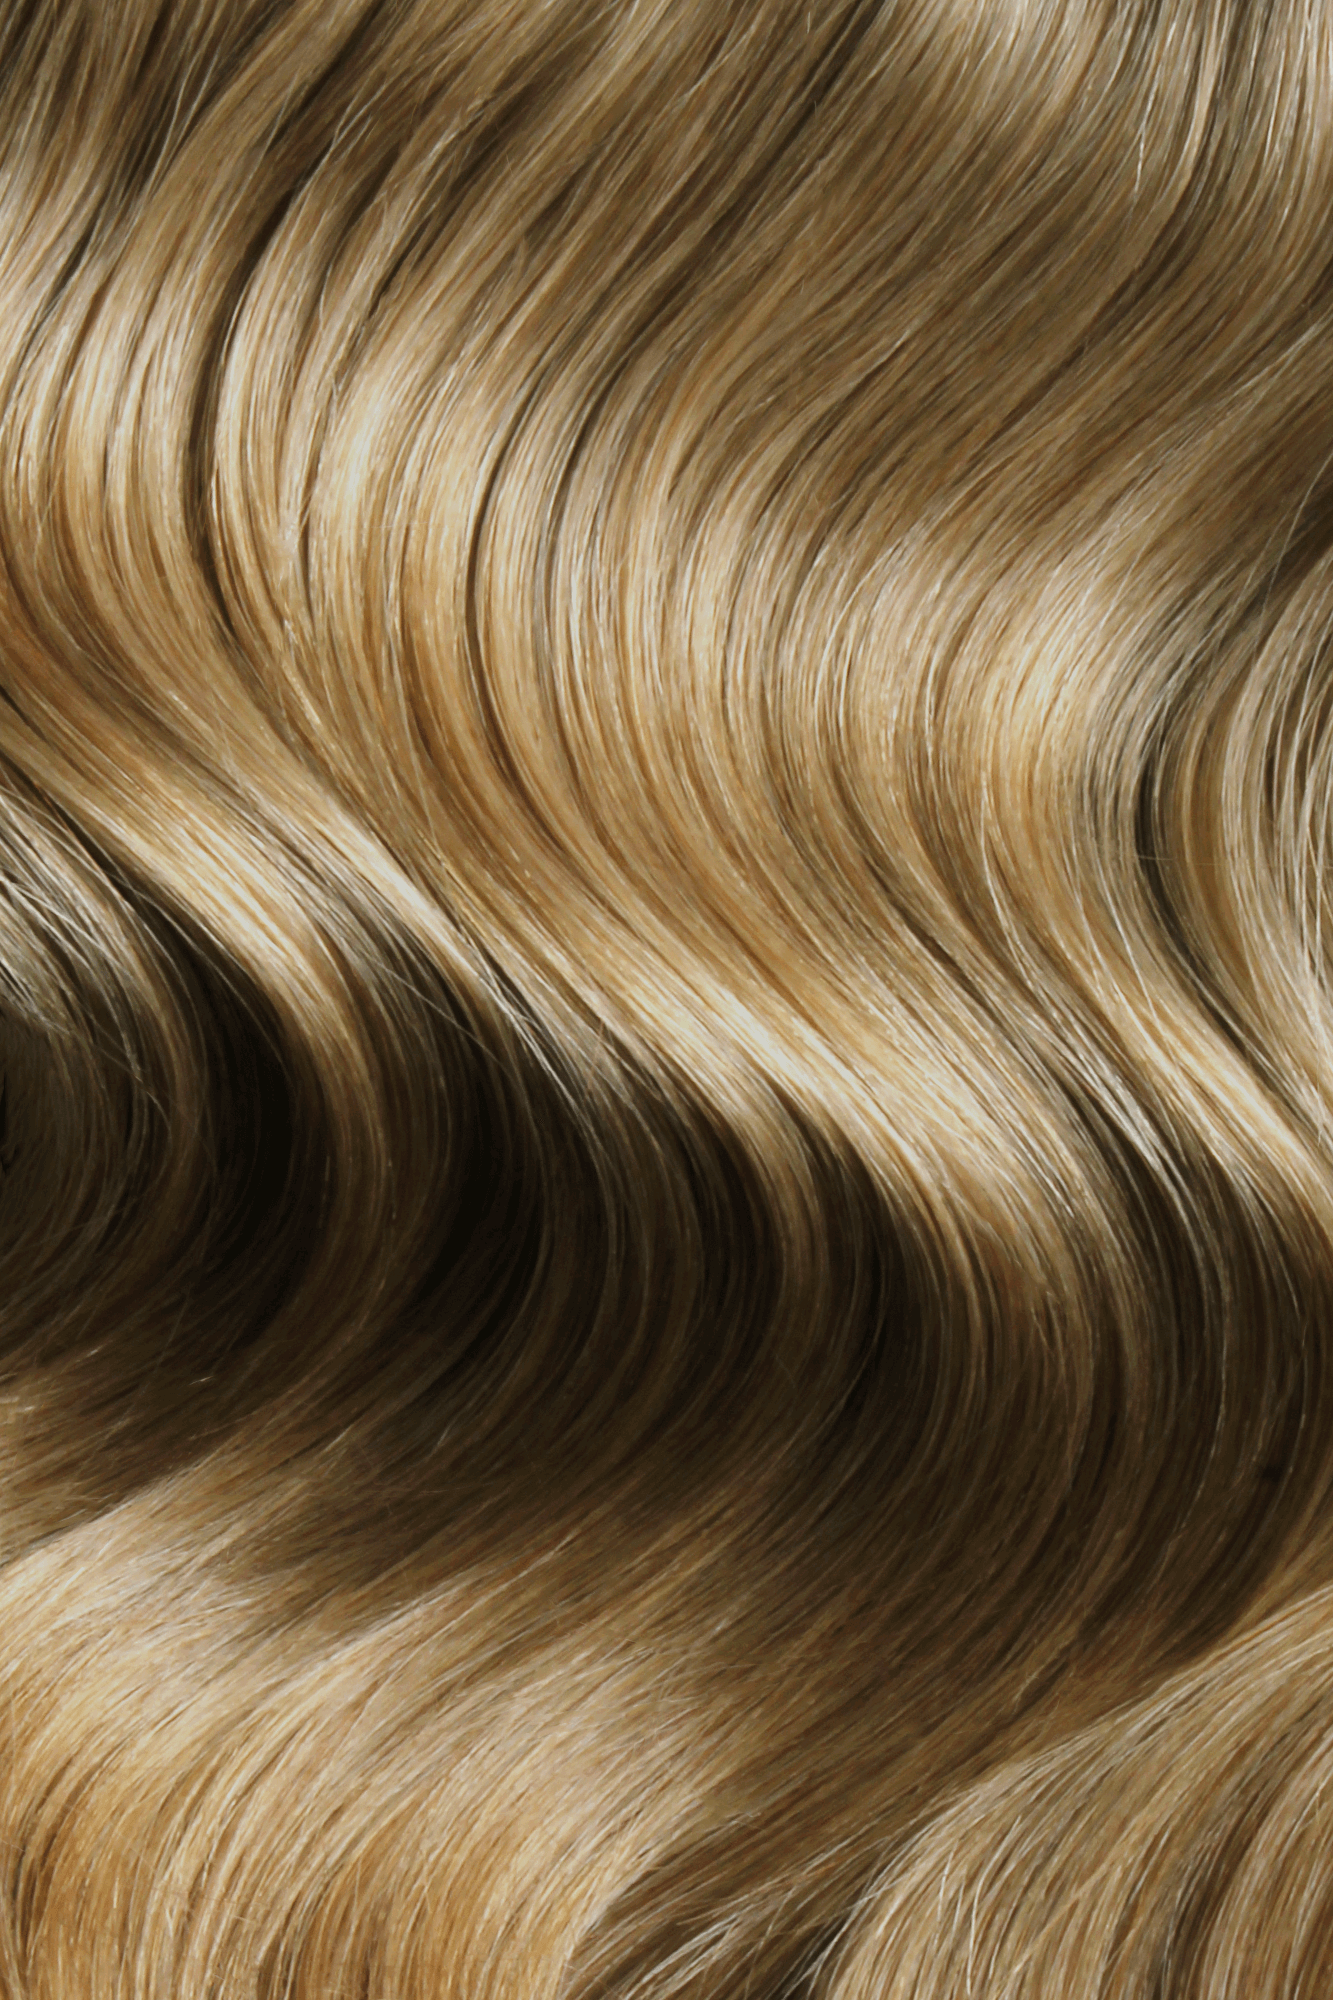 SEAMLESS® Tapes 18 Inches - SWAY Hair Extensions Mocha-8 clip-in hair extensions made of 100% Double Drawn, Remy Human Hair. SWAY SEAMLESS® Tapes, 18 inches. Lightweight, flexible, and perfect for any hairstyle.